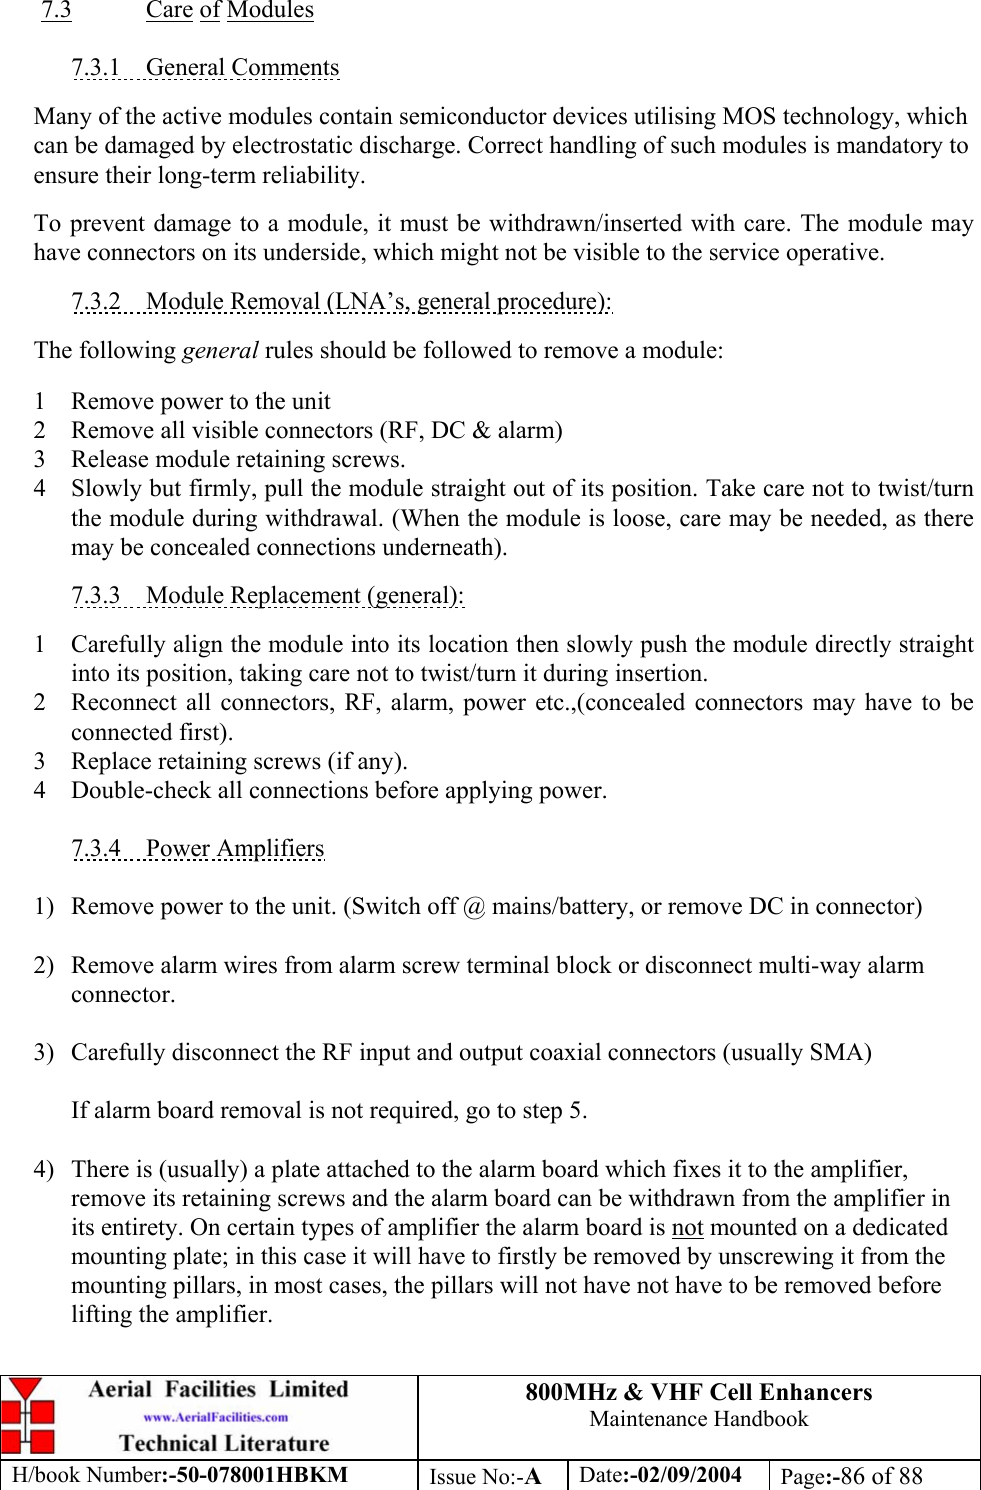 800MHz &amp; VHF Cell Enhancers Maintenance Handbook H/book Number:-50-078001HBKM Issue No:-A Date:-02/09/2004 Page:-86 of 88   7.3 Care of Modules  7.3.1 General Comments  Many of the active modules contain semiconductor devices utilising MOS technology, which can be damaged by electrostatic discharge. Correct handling of such modules is mandatory to ensure their long-term reliability.  To prevent damage to a module, it must be withdrawn/inserted with care. The module may have connectors on its underside, which might not be visible to the service operative.  7.3.2  Module Removal (LNA’s, general procedure):  The following general rules should be followed to remove a module:  1  Remove power to the unit 2  Remove all visible connectors (RF, DC &amp; alarm) 3  Release module retaining screws. 4  Slowly but firmly, pull the module straight out of its position. Take care not to twist/turn the module during withdrawal. (When the module is loose, care may be needed, as there may be concealed connections underneath).  7.3.3  Module Replacement (general):  1  Carefully align the module into its location then slowly push the module directly straight into its position, taking care not to twist/turn it during insertion. 2  Reconnect all connectors, RF, alarm, power etc.,(concealed connectors may have to be connected first). 3  Replace retaining screws (if any). 4  Double-check all connections before applying power.  7.3.4 Power Amplifiers  1)  Remove power to the unit. (Switch off @ mains/battery, or remove DC in connector)  2)  Remove alarm wires from alarm screw terminal block or disconnect multi-way alarm connector.  3)  Carefully disconnect the RF input and output coaxial connectors (usually SMA)  If alarm board removal is not required, go to step 5.  4)  There is (usually) a plate attached to the alarm board which fixes it to the amplifier, remove its retaining screws and the alarm board can be withdrawn from the amplifier in its entirety. On certain types of amplifier the alarm board is not mounted on a dedicated mounting plate; in this case it will have to firstly be removed by unscrewing it from the mounting pillars, in most cases, the pillars will not have not have to be removed before lifting the amplifier.  